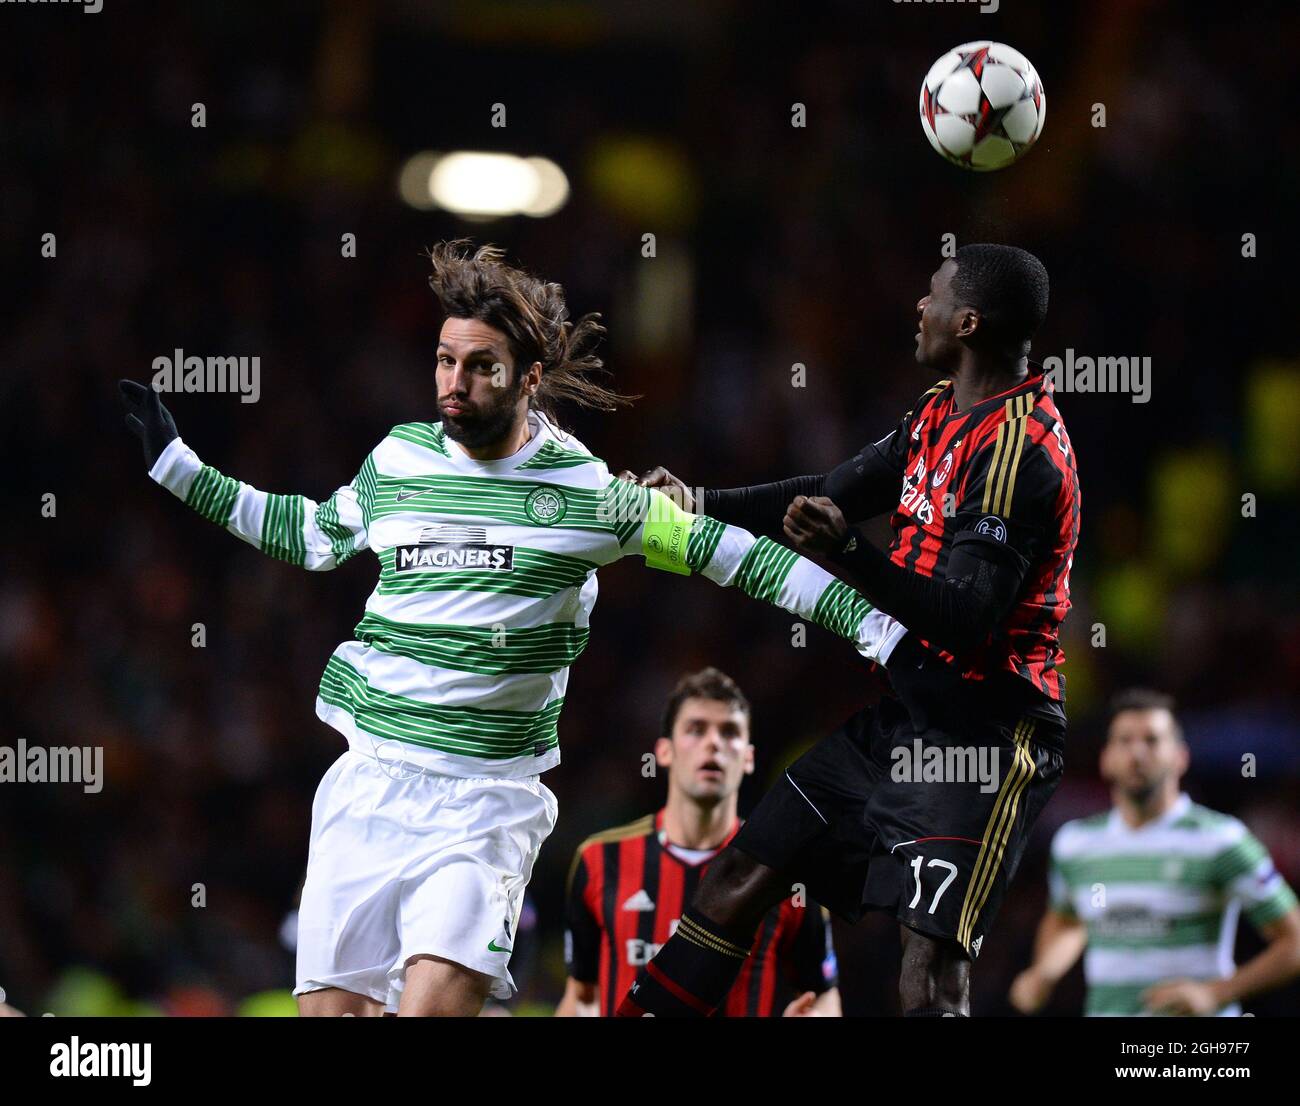 Cristian Zapata of AC Milan clears the ball under pressure from Giorgos Samaras of Celtic during the UEFA Champions League Group H match between Celtic and AC Milan held at Celtic Park in Glasgow, Scotland on Nov. 26, 2013. Stock Photo